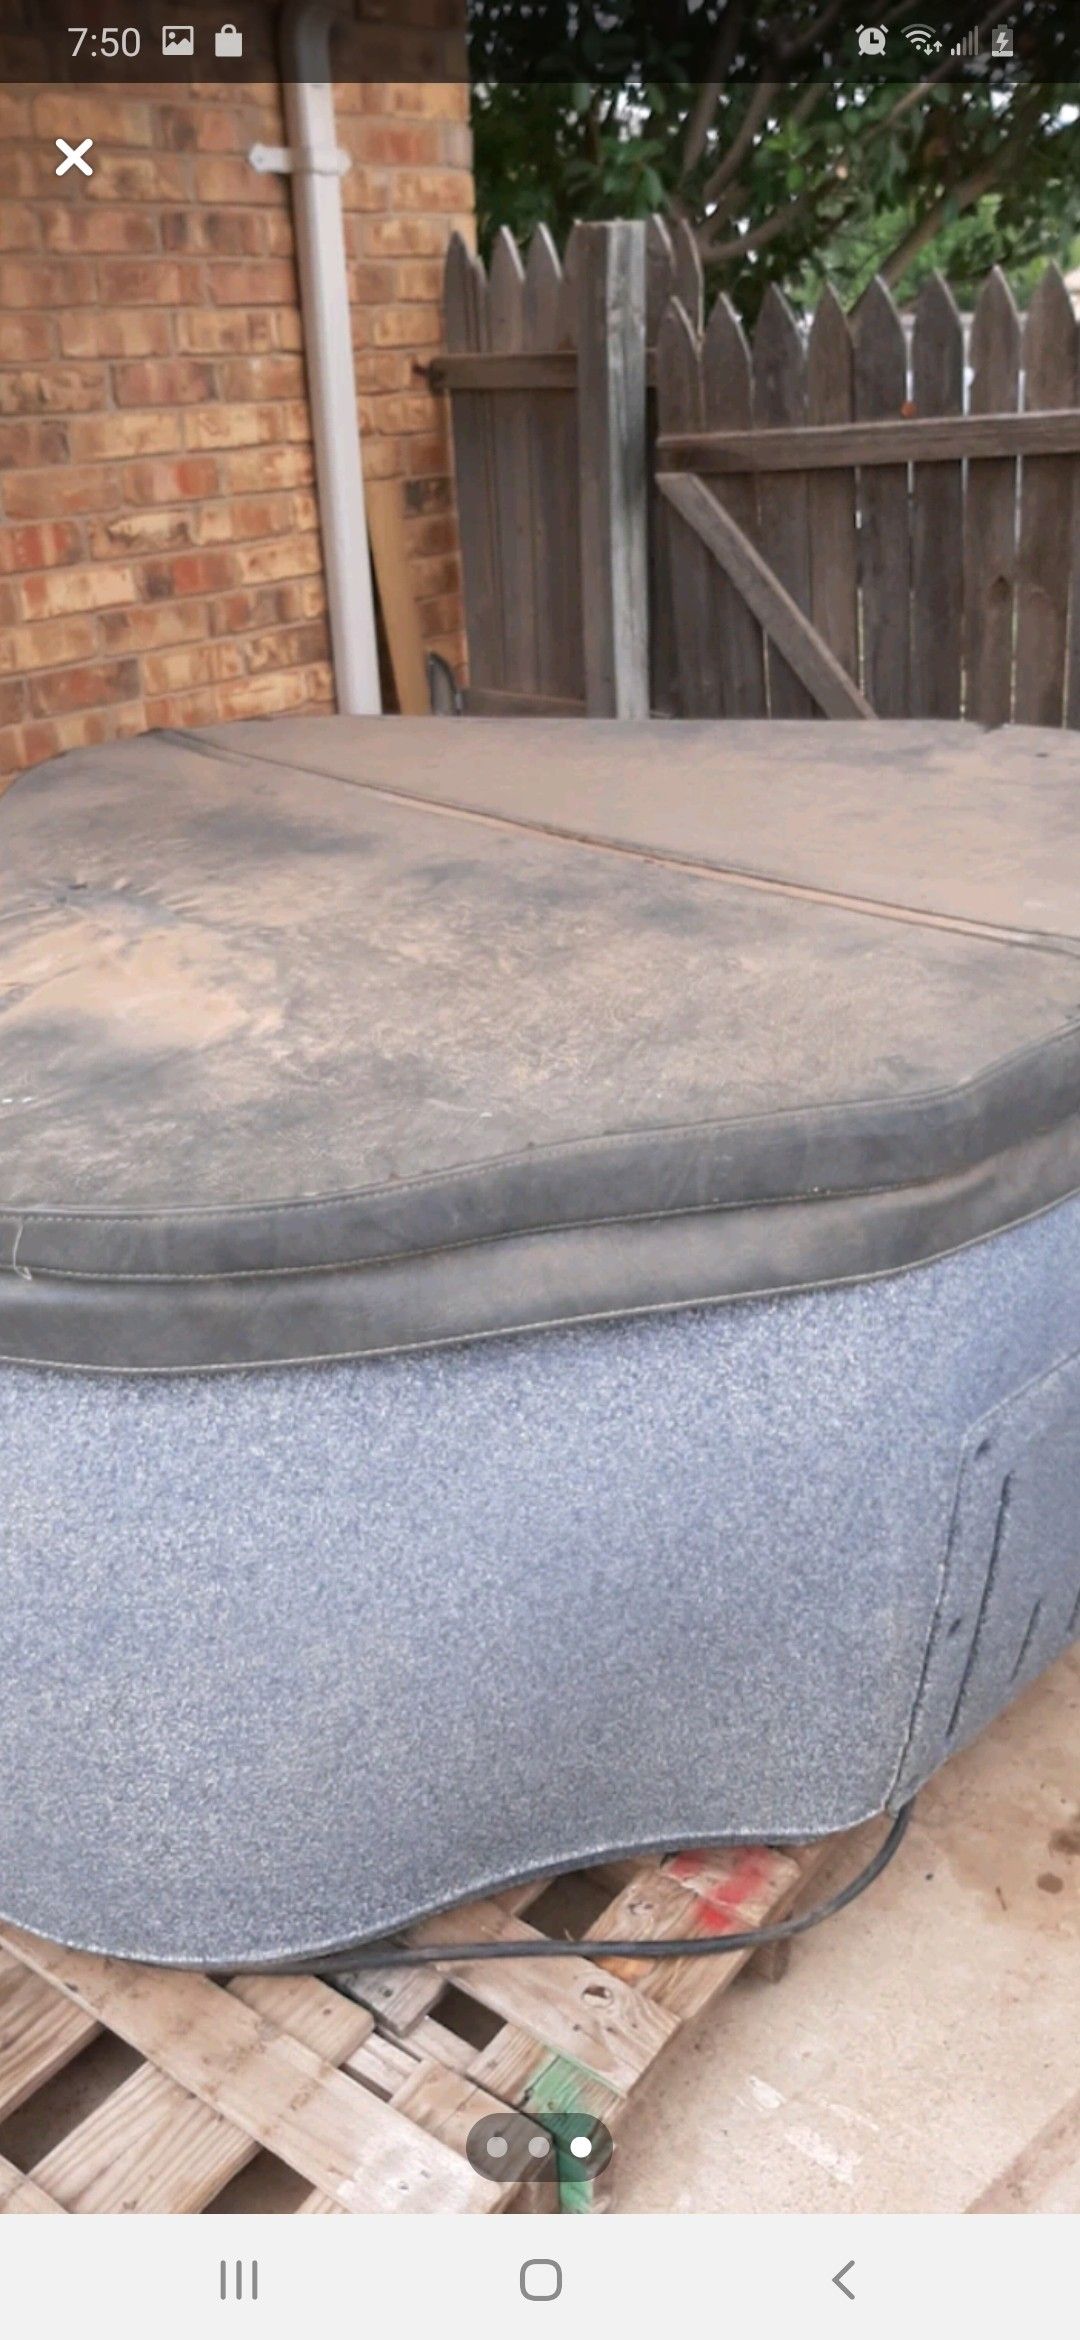 2 seater hot tub